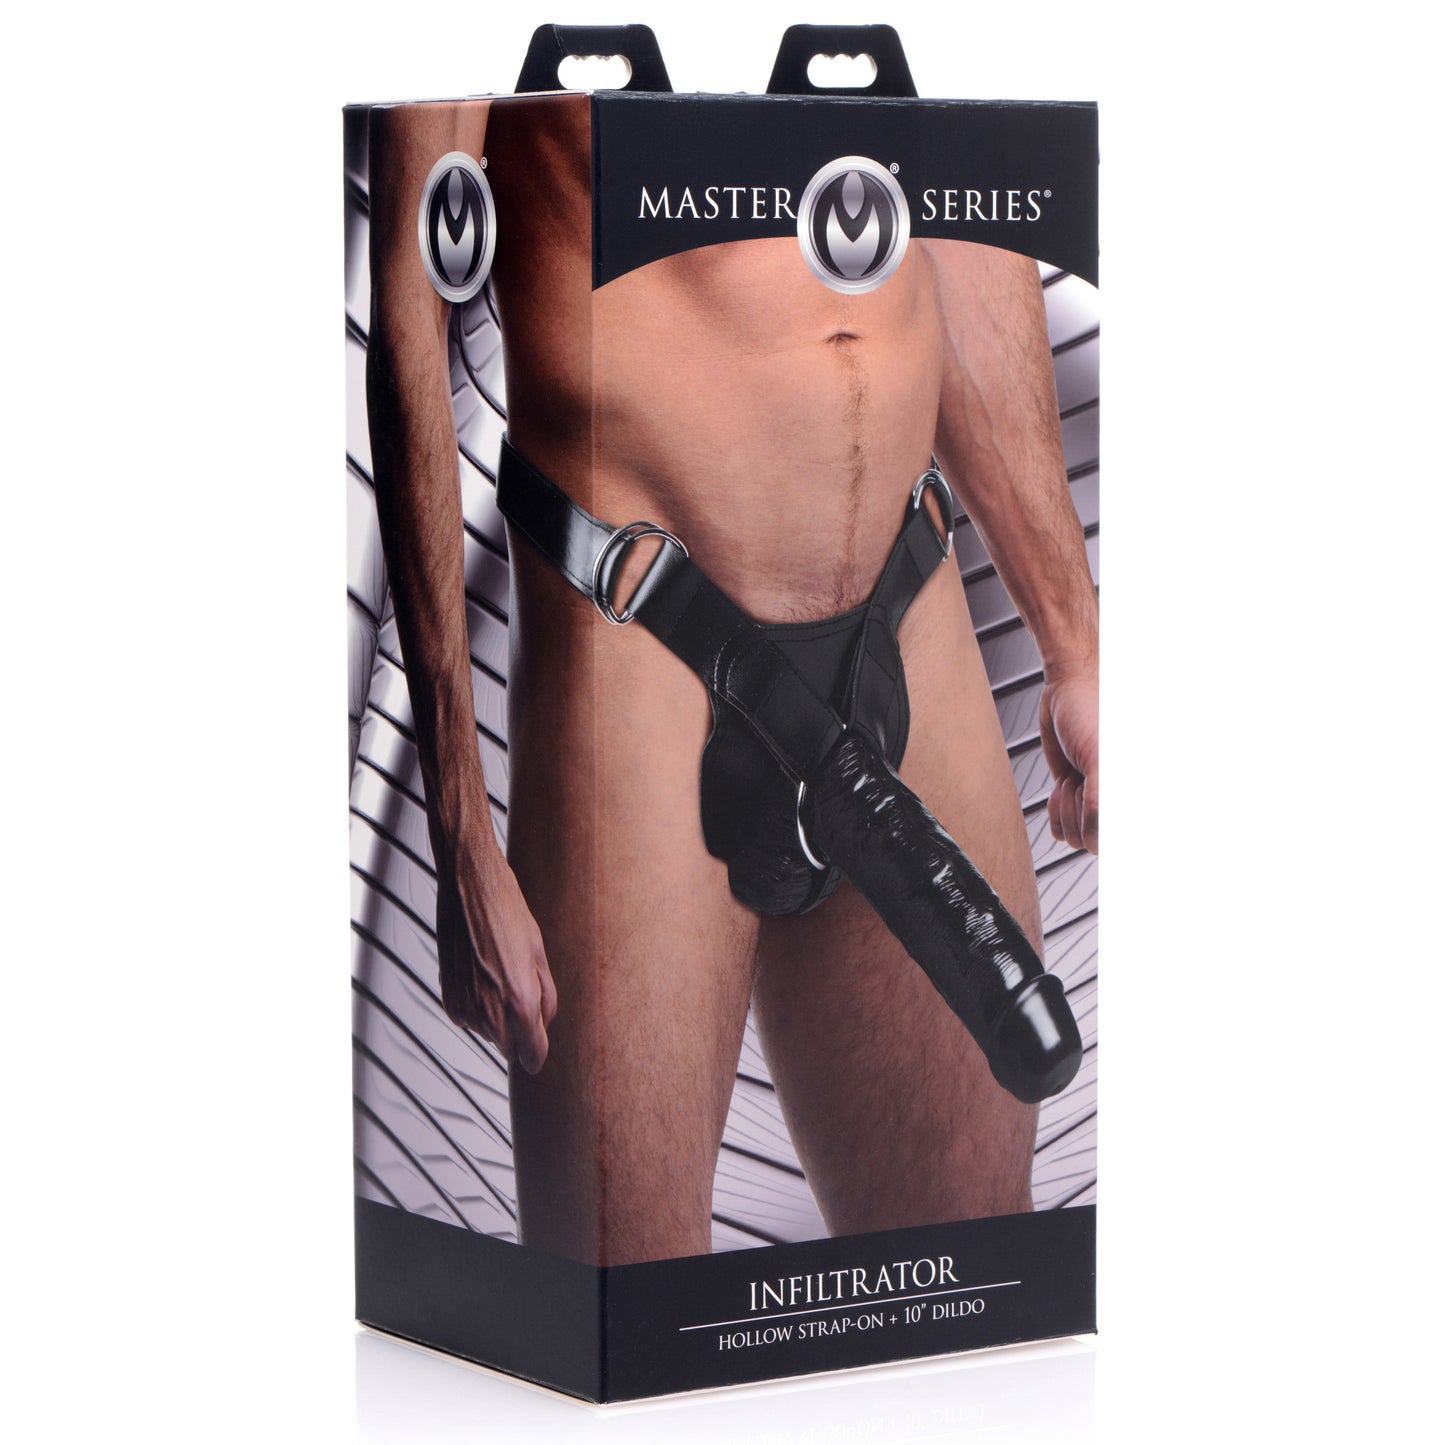 Infiltrator Hollow Strap-On with 10 Inch Dildo - UABDSM